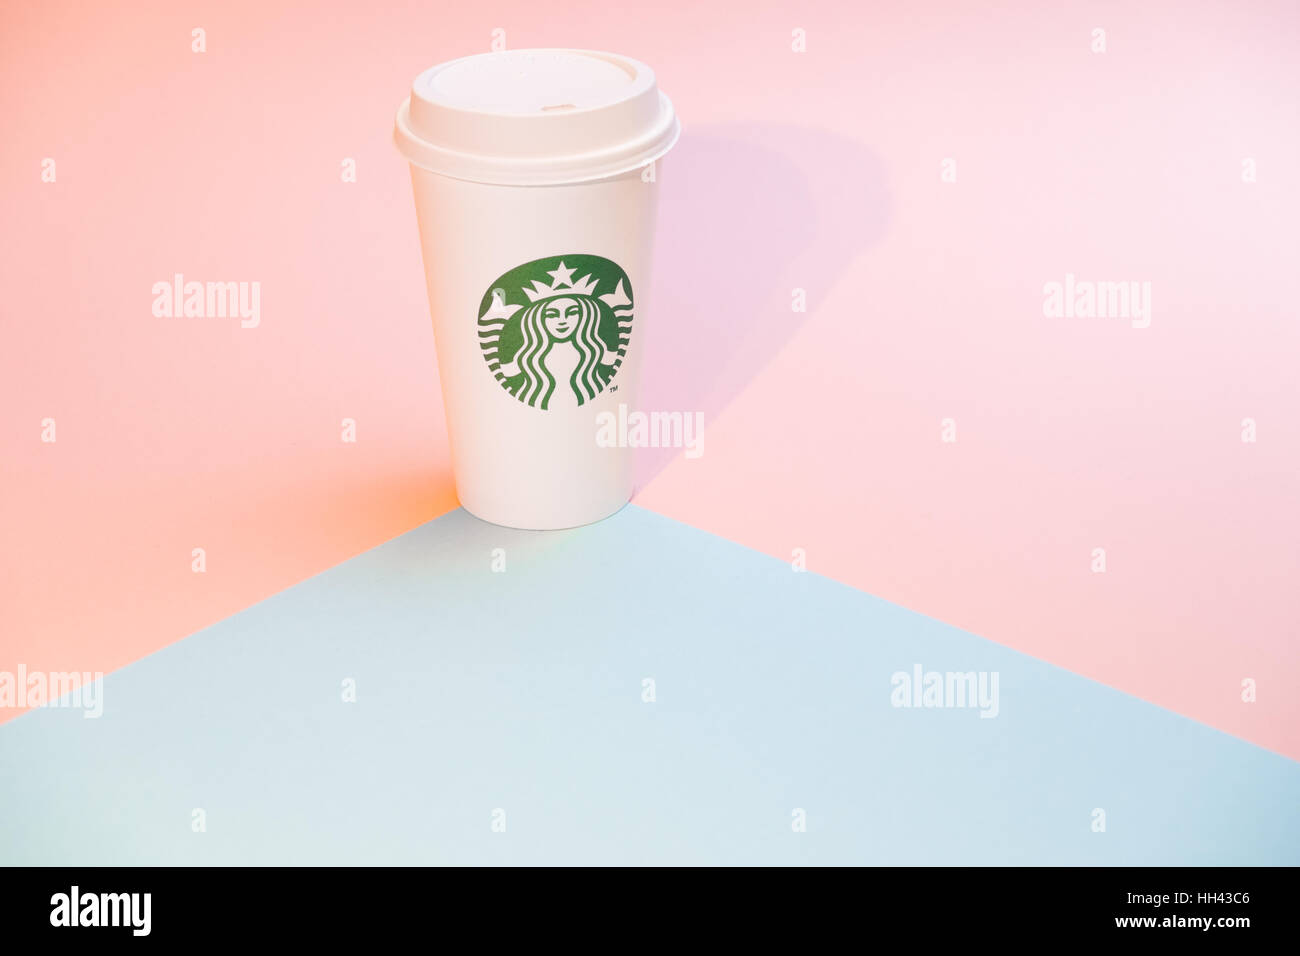 Disposable coffee cup against pink and aqua backdrop Stock Photo